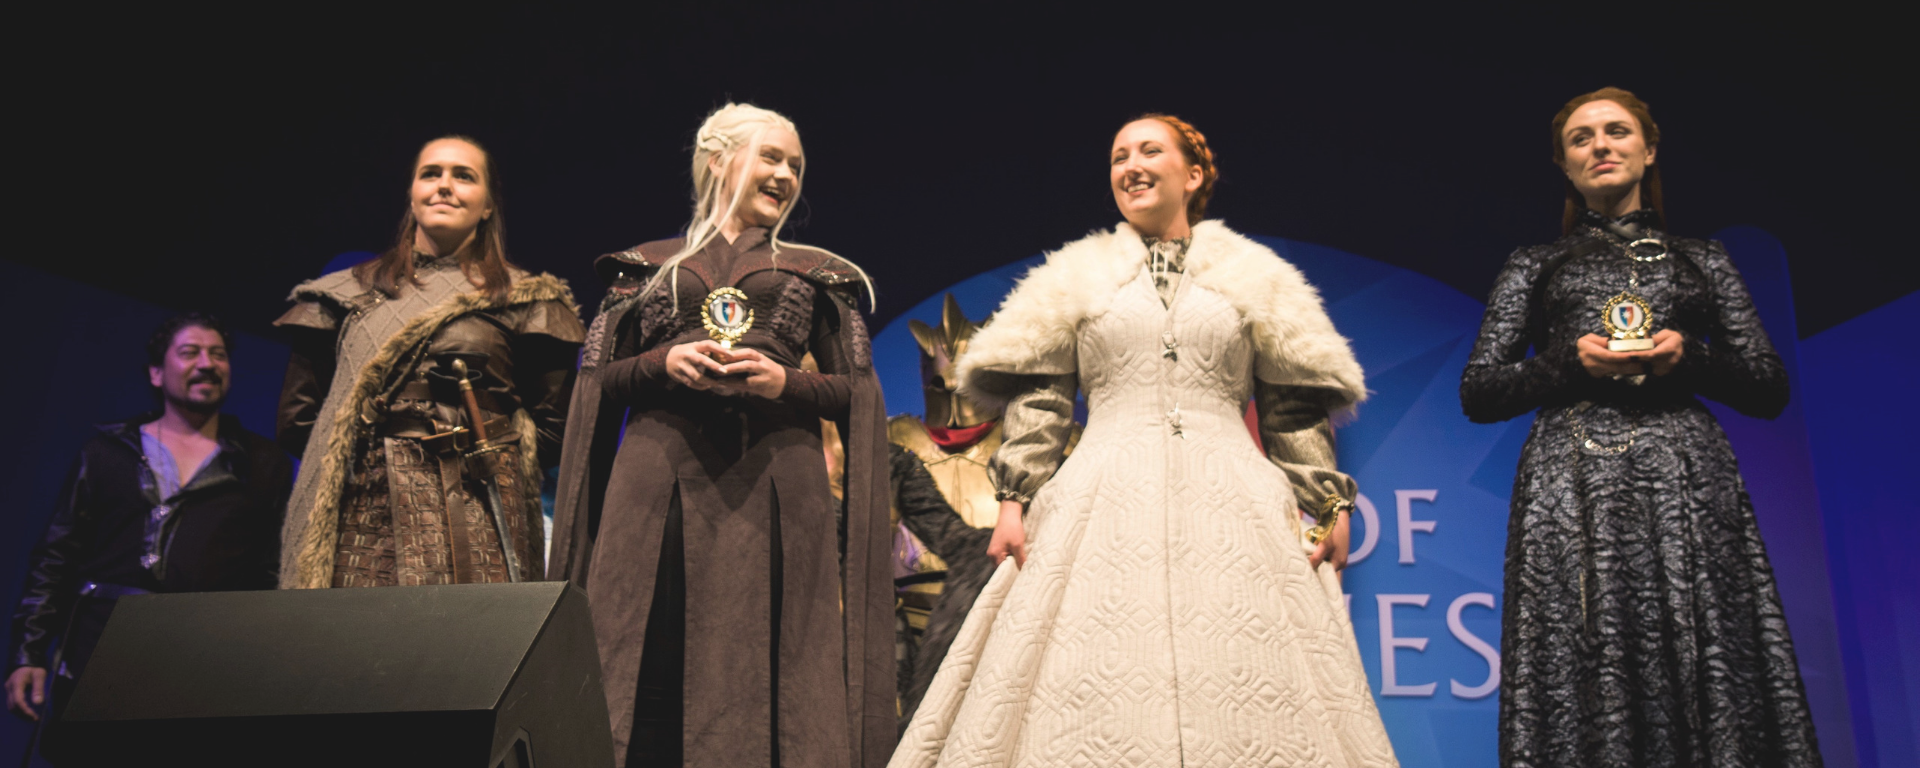 The winners of the Con Of Thrones 2019 Cosplay Contest